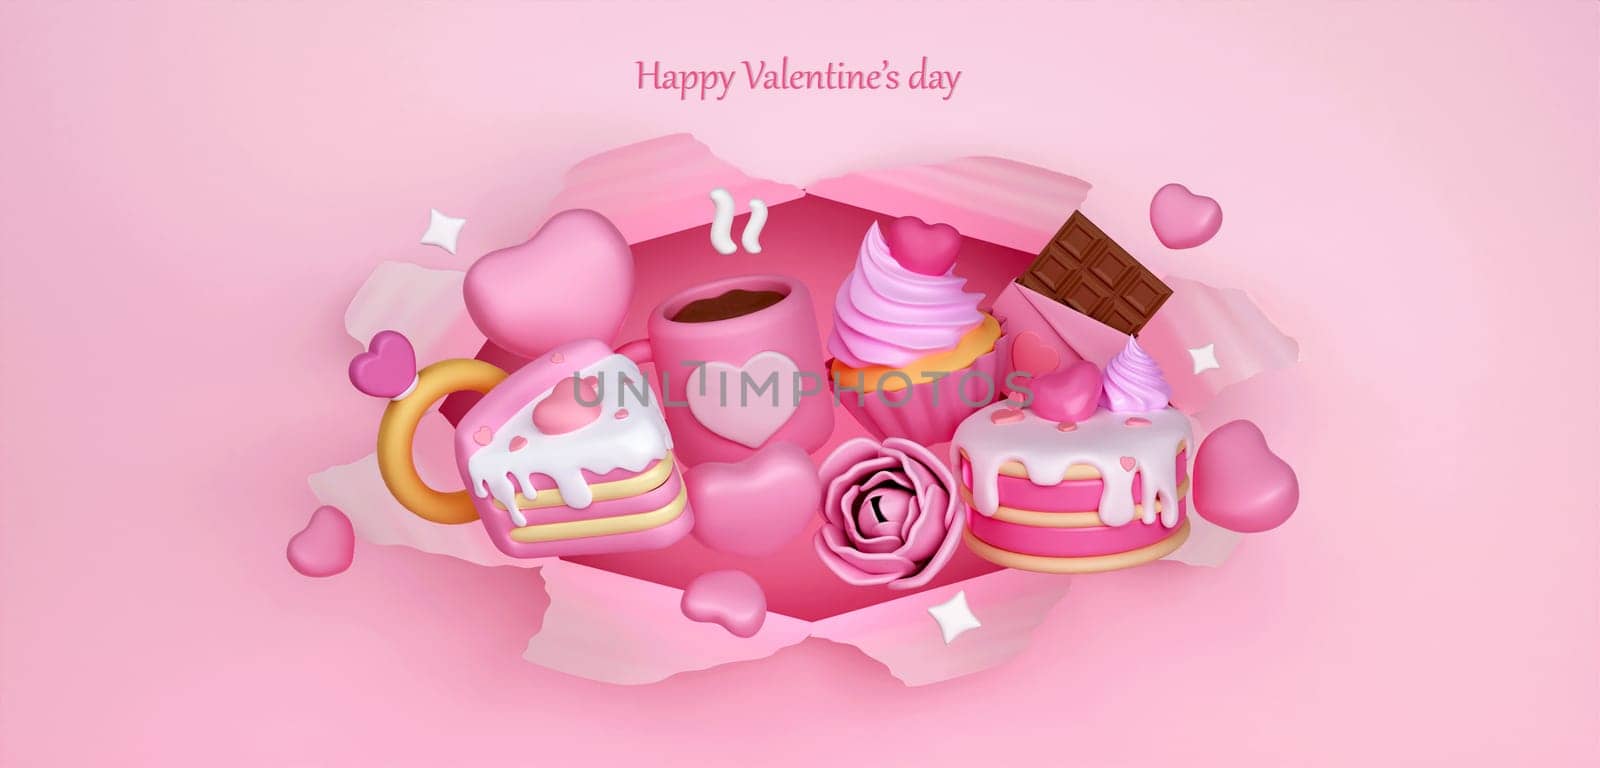 Pink heart, cup cake, chocolate, and rose on background. Valentine Wallpaper with Pink love hearts. 3D rendering illustration.